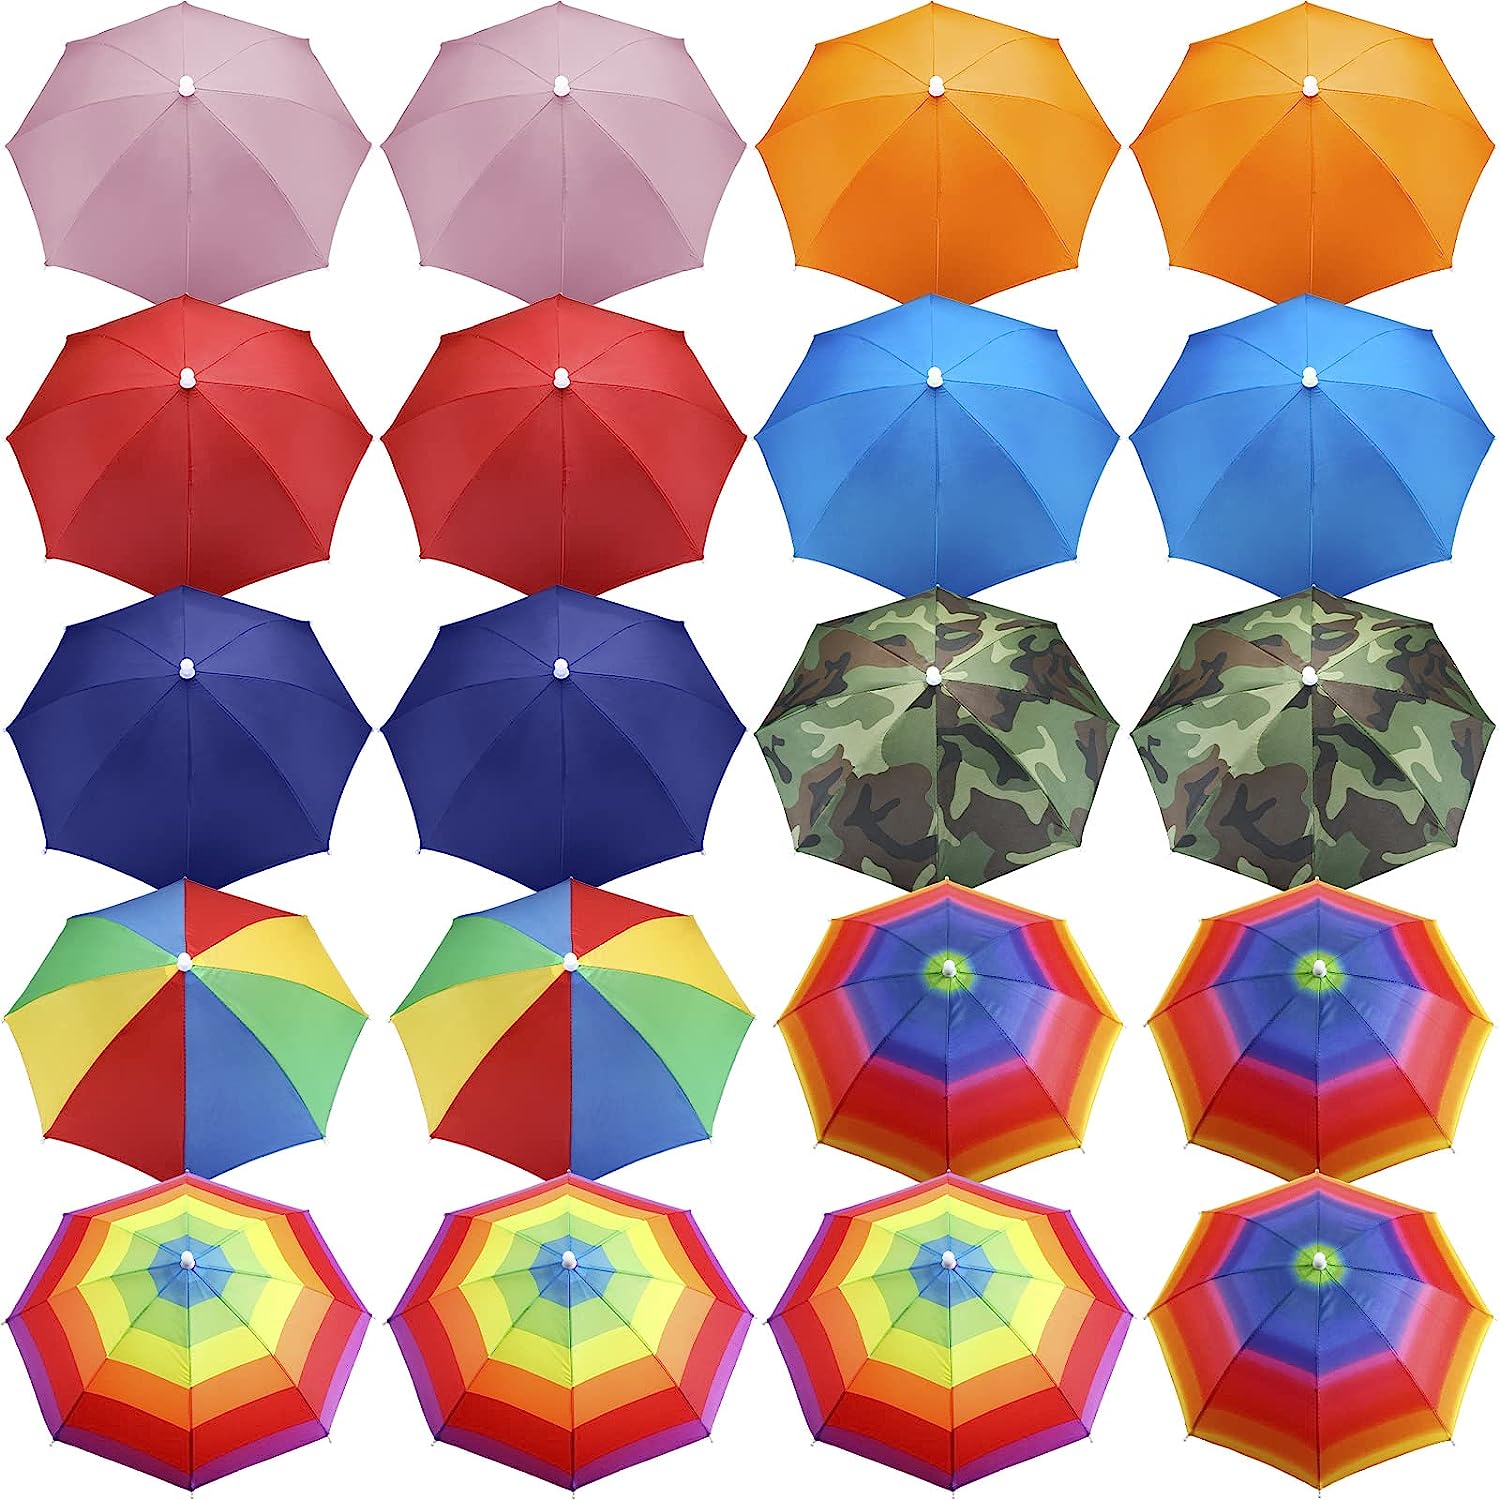 Umbrella Hat 4 Pack for Kids Adults Outdoor 20 Multicolor Head Umbrella Cap Rainbow Fishing Hats and Folding Waterproof Hands Free Party Beach